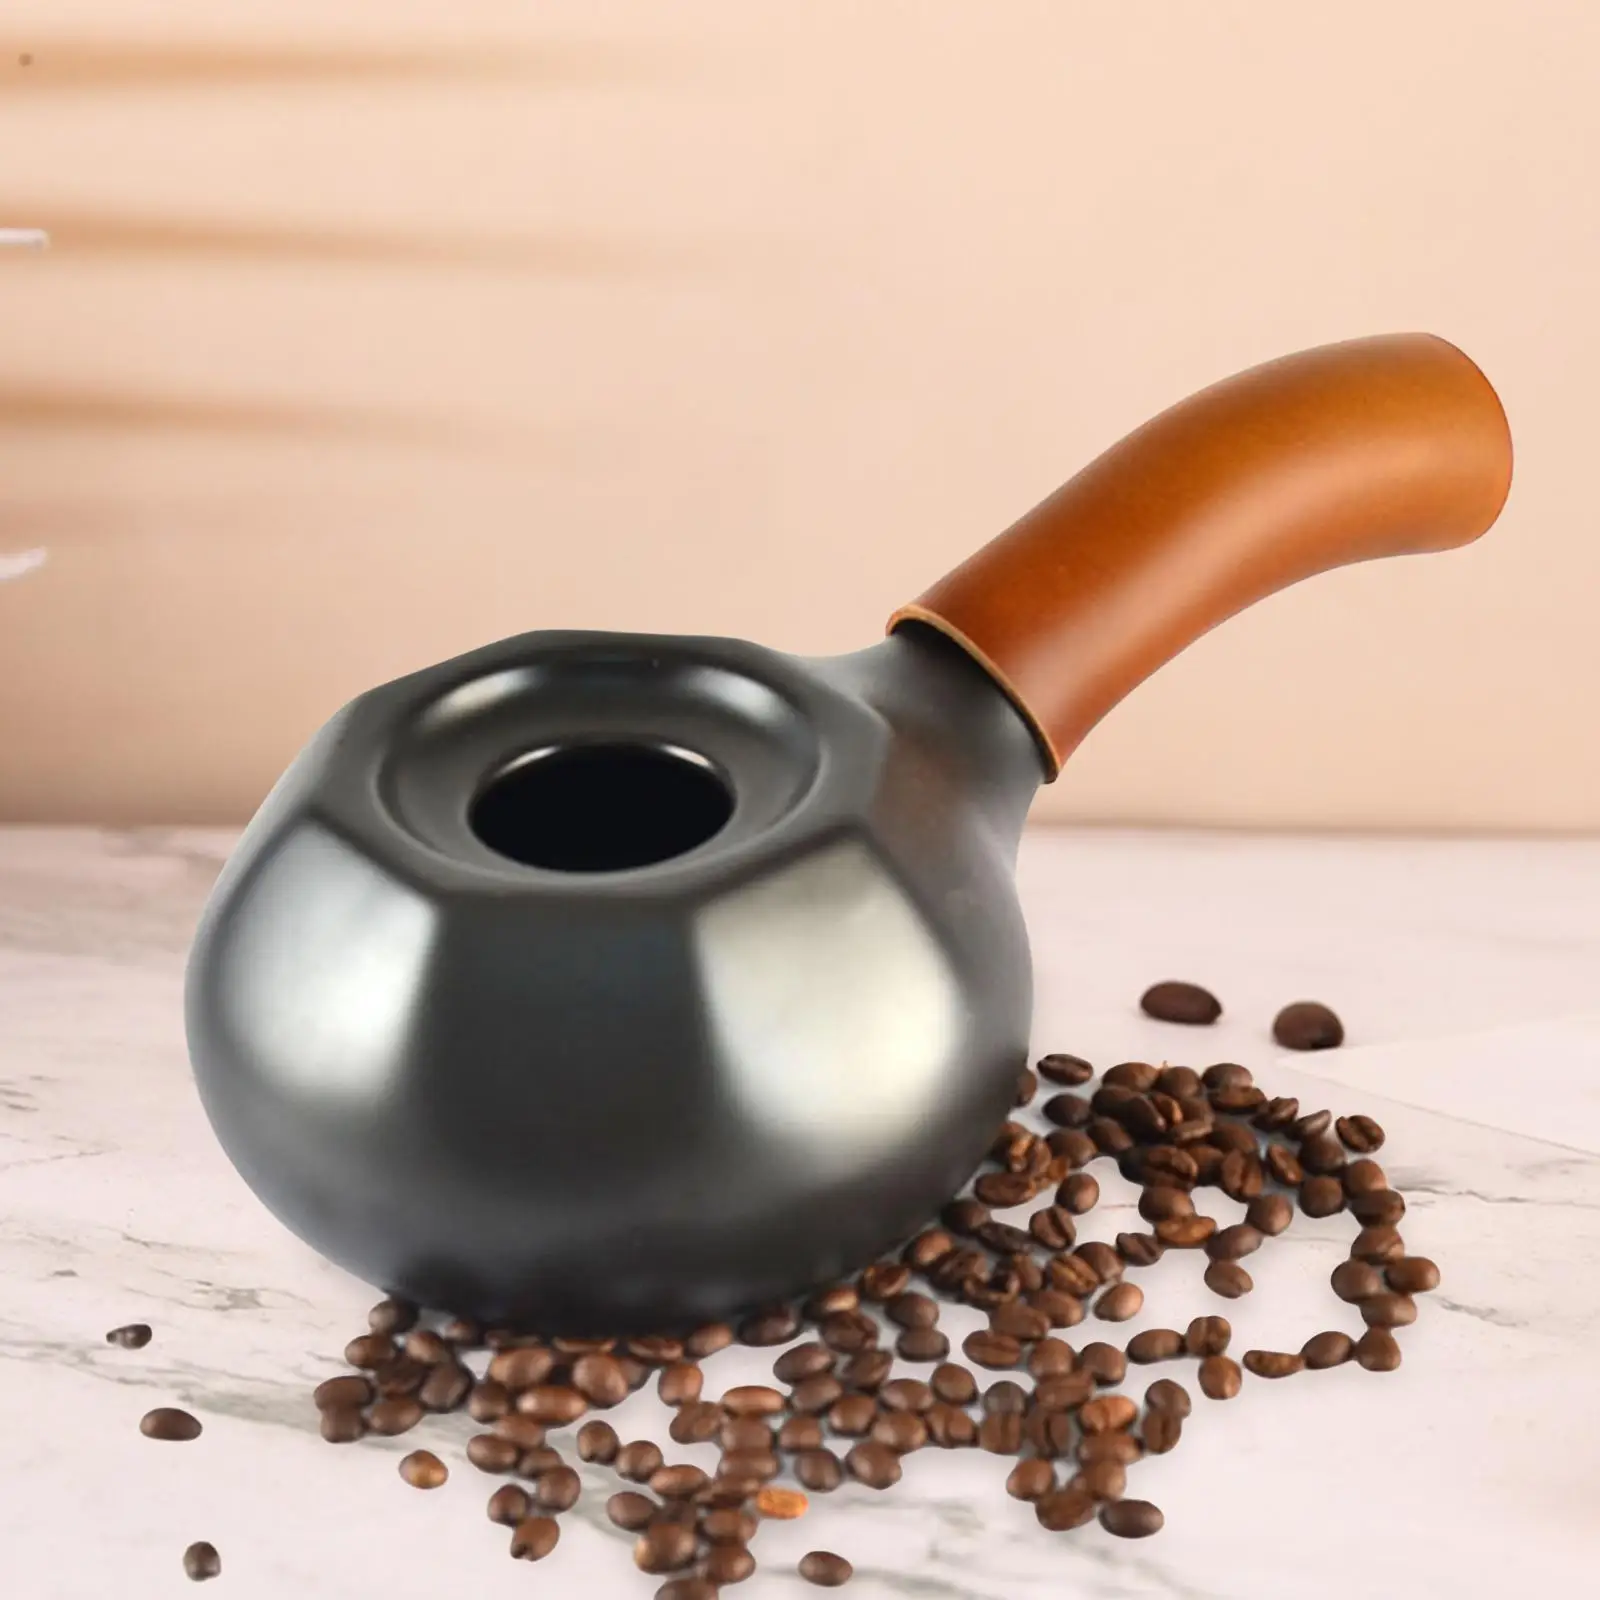 Handy Ceramic Coffee Roaster for Coffee Lovers Beginners Need Fire Source Roasting Machine for Coffee Beans Home Cafe DIY